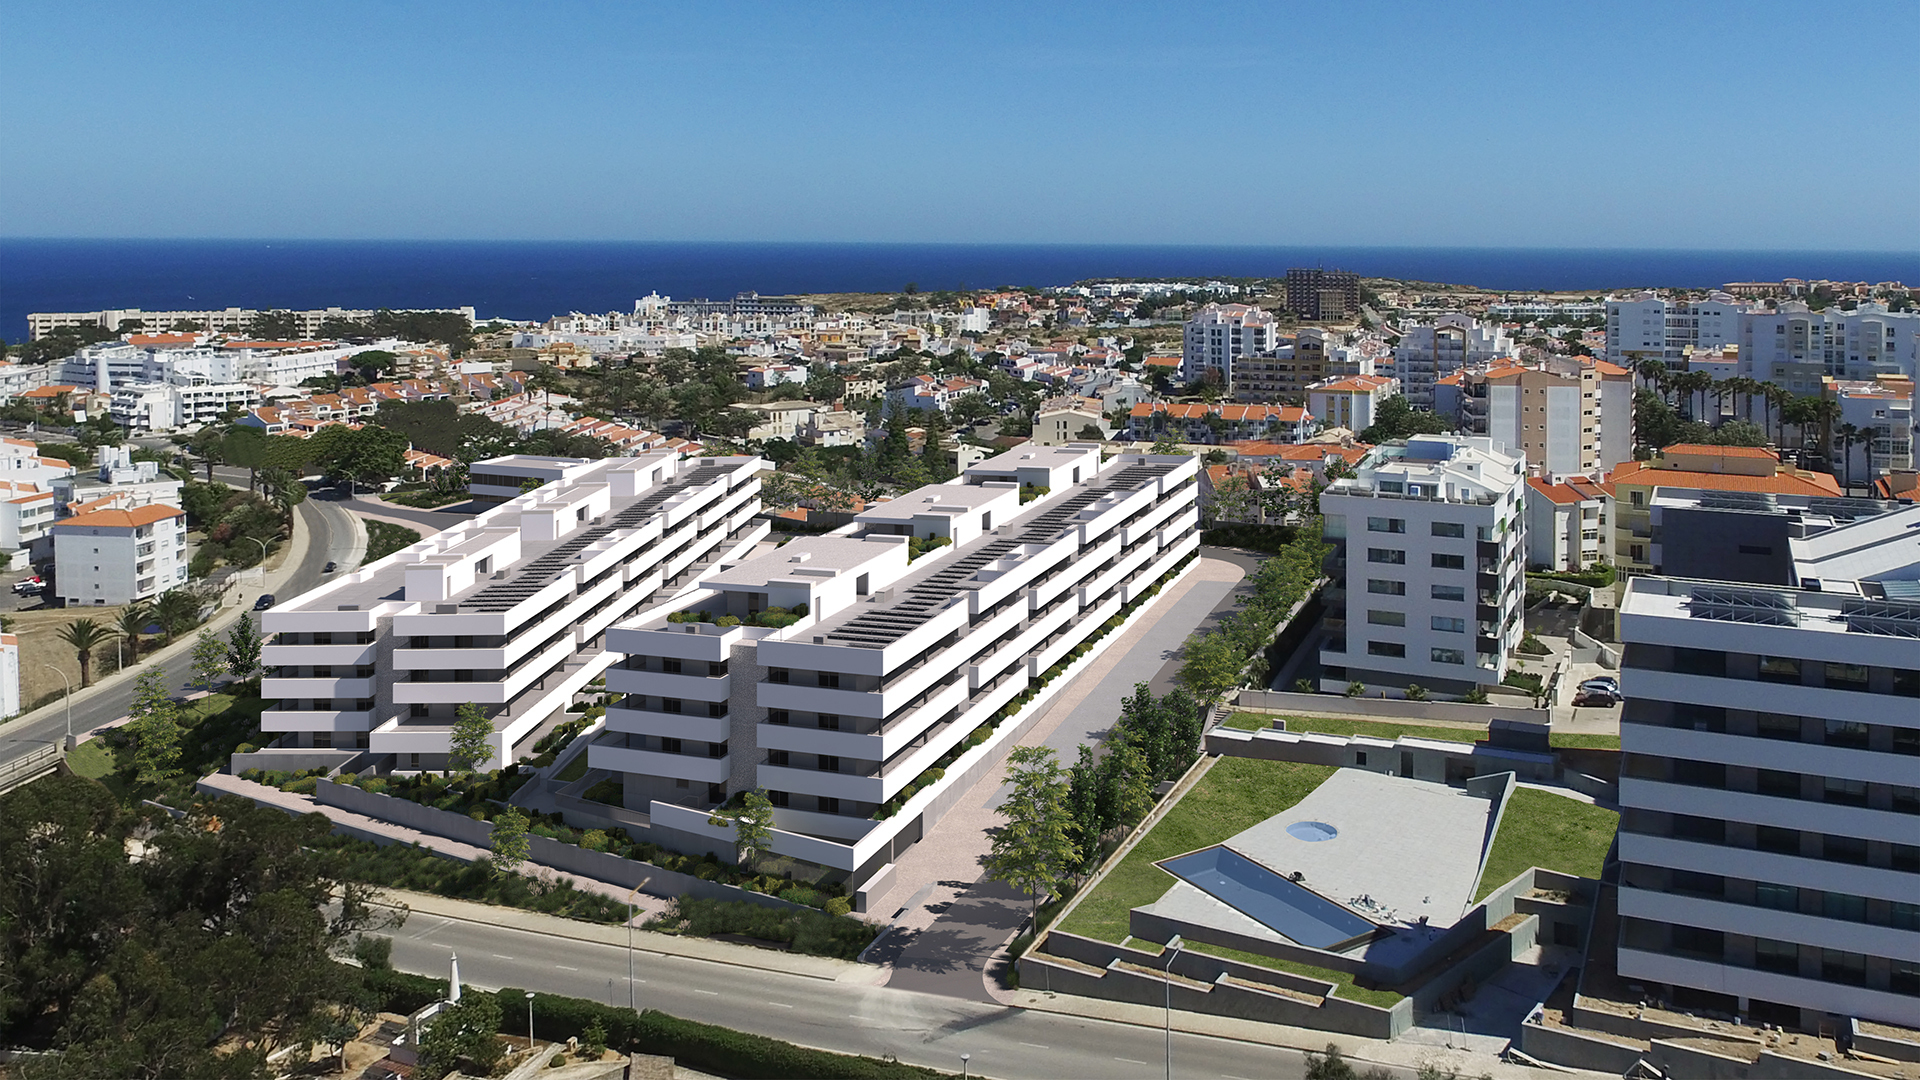 2 Bedroom apartments with communal pool, spa and sea views, Lagos, West Algarve  | LG1853 Fantastic apartments under construction, some with sea views, only a few minutes away from the old town of Lagos, marina, beautiful beaches, and golf courses. Owners will have access to a communal pool and spa area. 